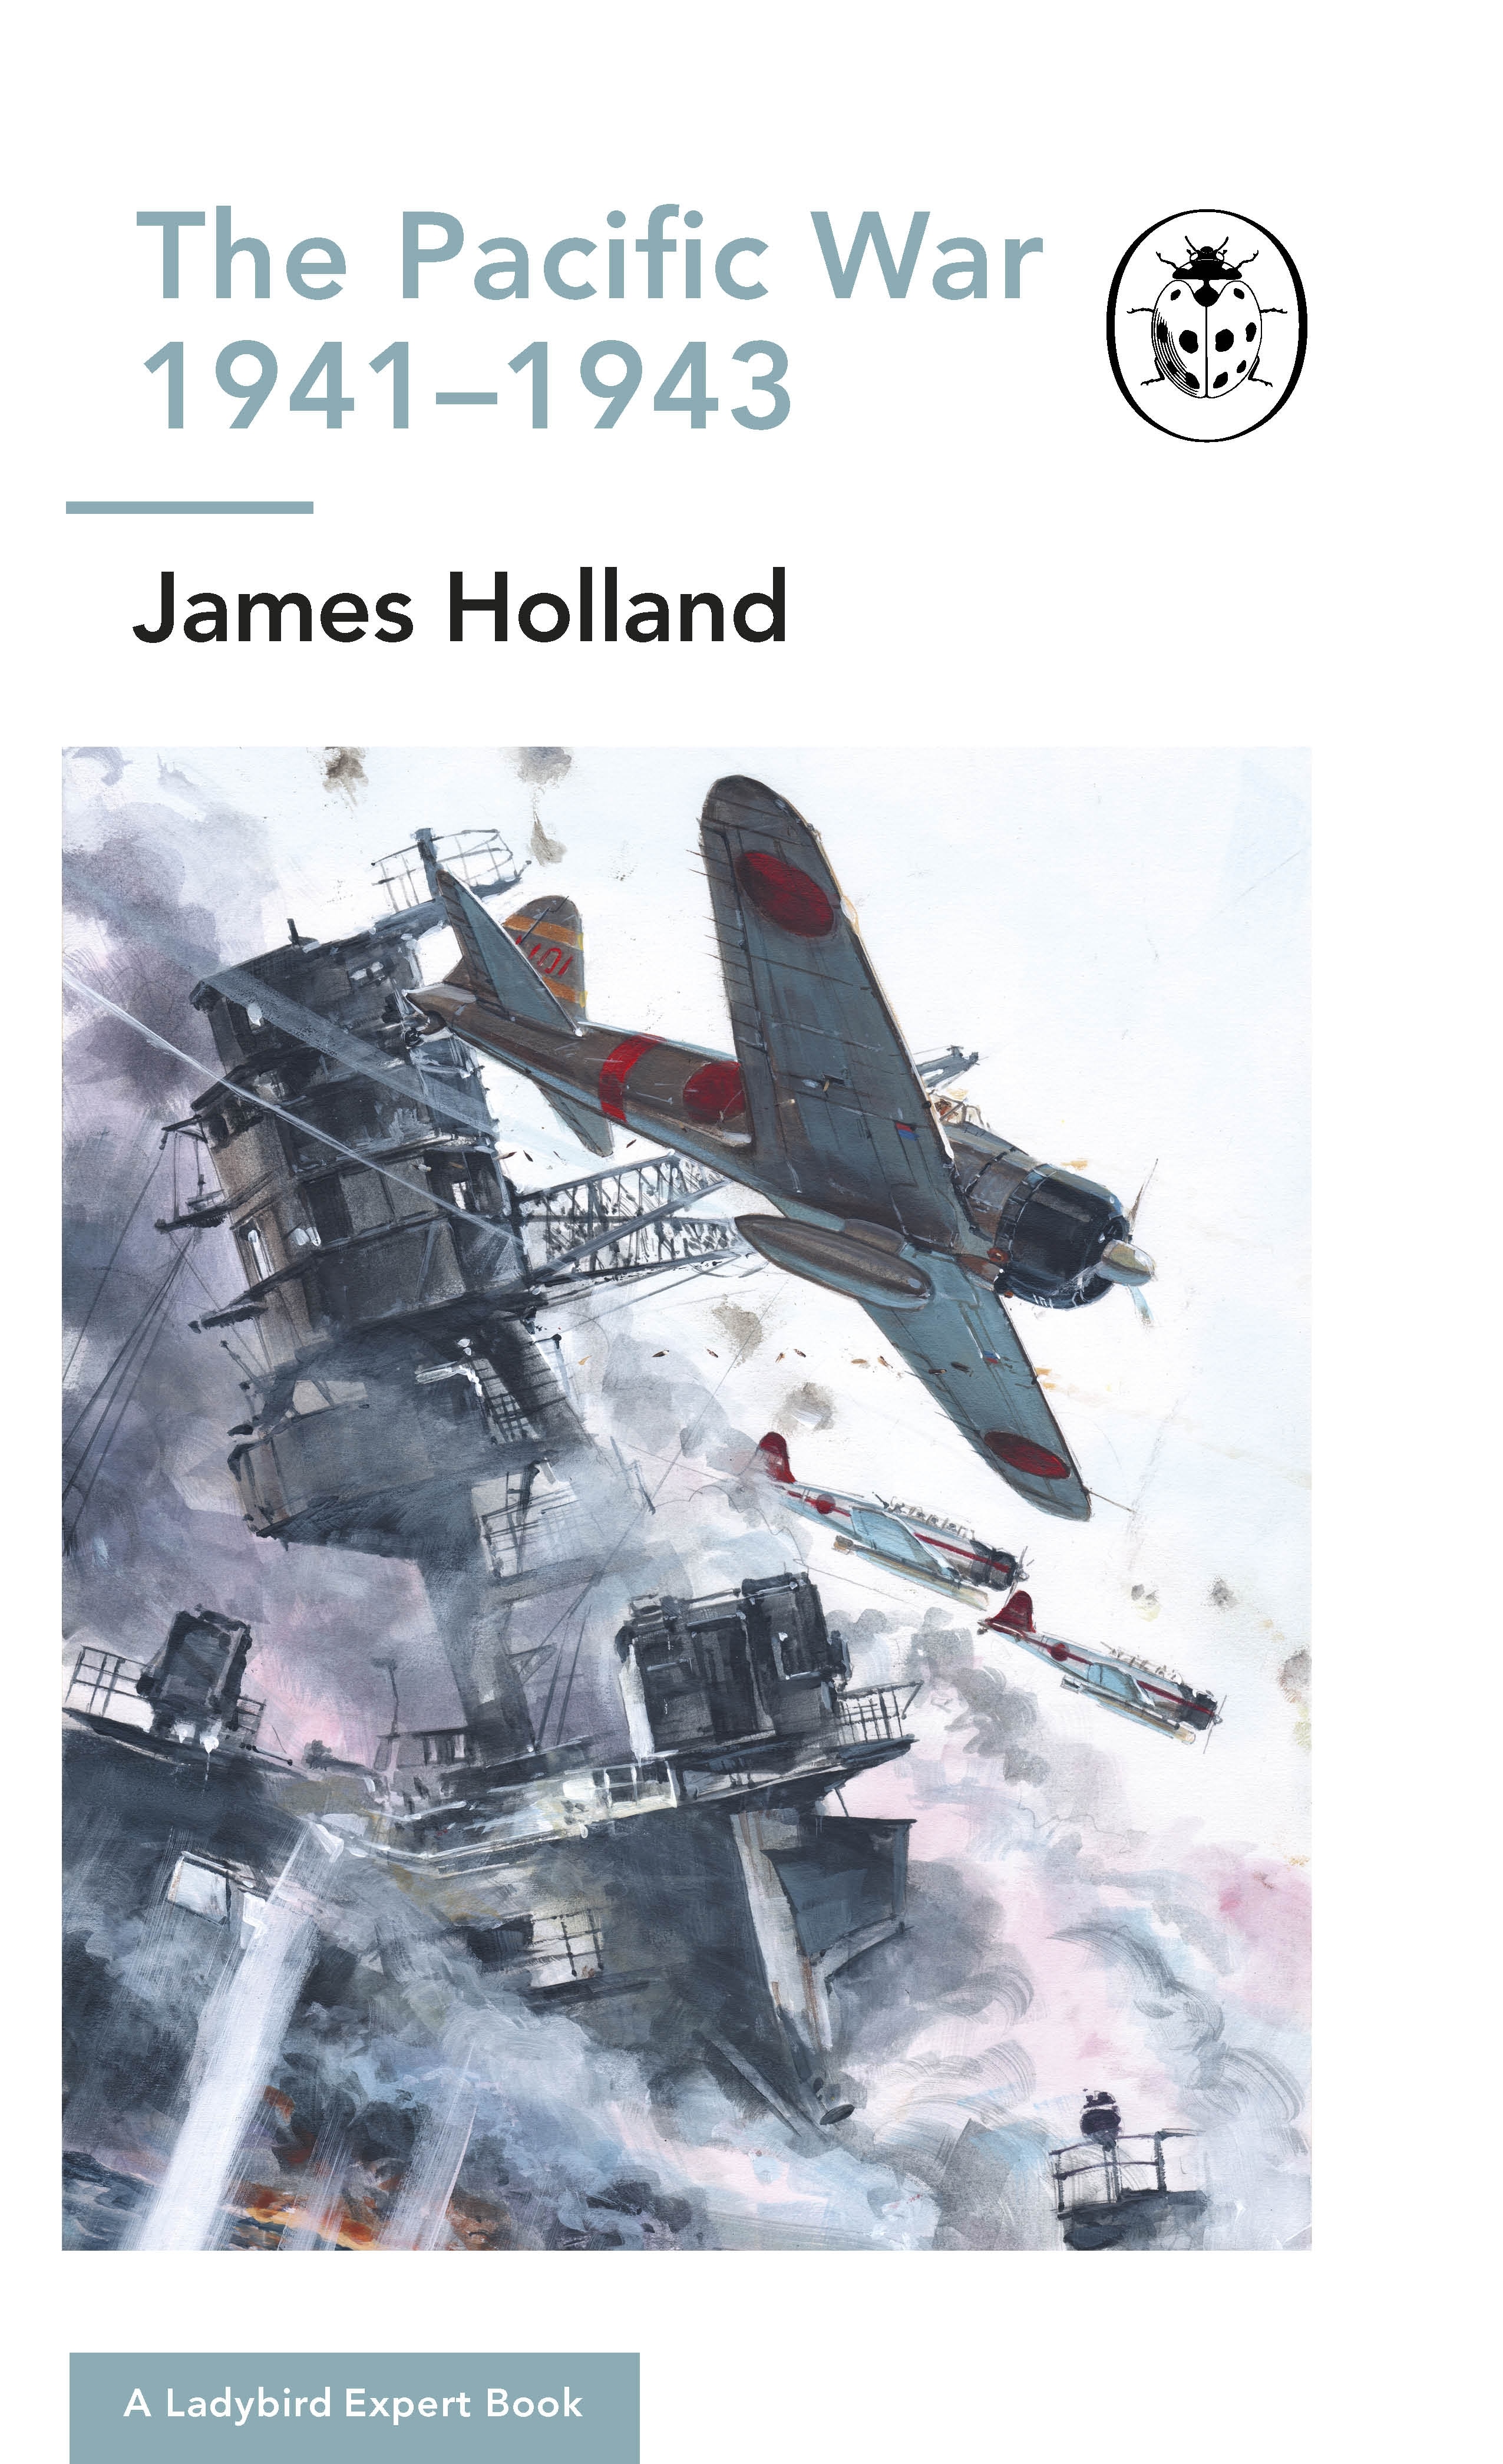 Book “The Pacific War 1941-1943” by James Holland — December 26, 2019